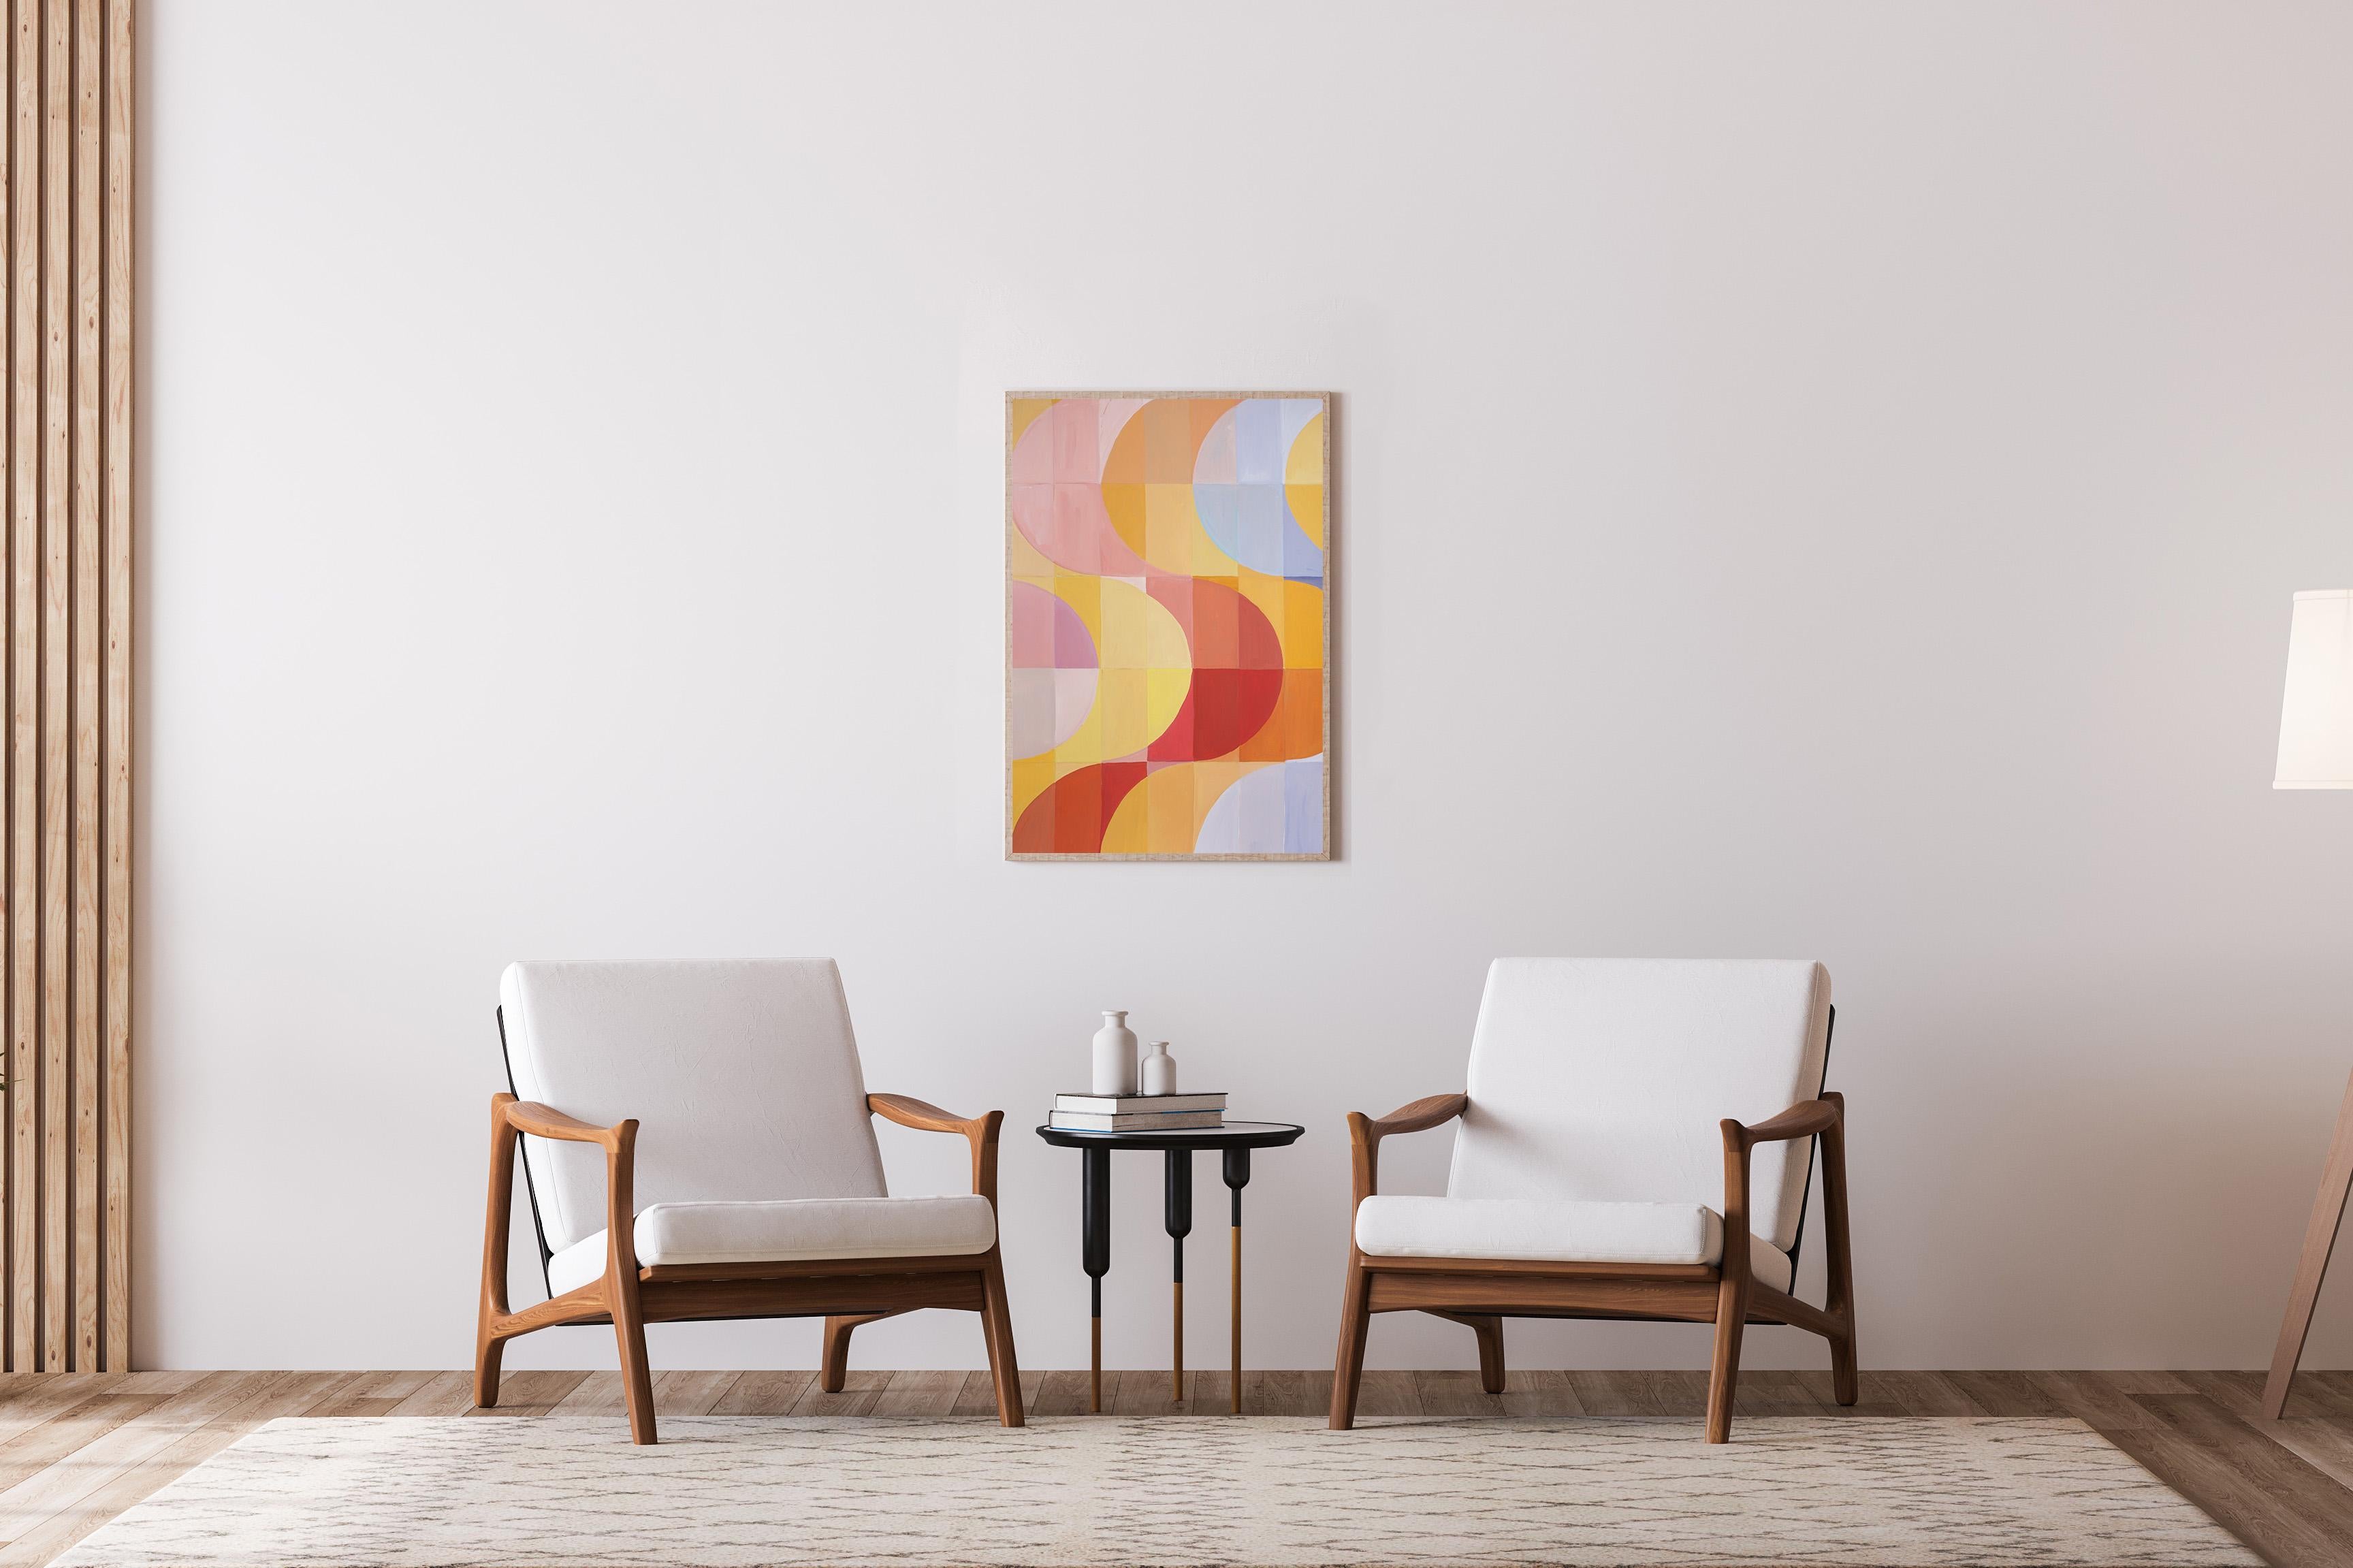 This abstract geometric acrylic painting is a vibrant and playful composition that draws inspiration from vintage Italian parasols. With a focus on bold, bright colors and clean lines, the painting features intersecting shapes and patterns that